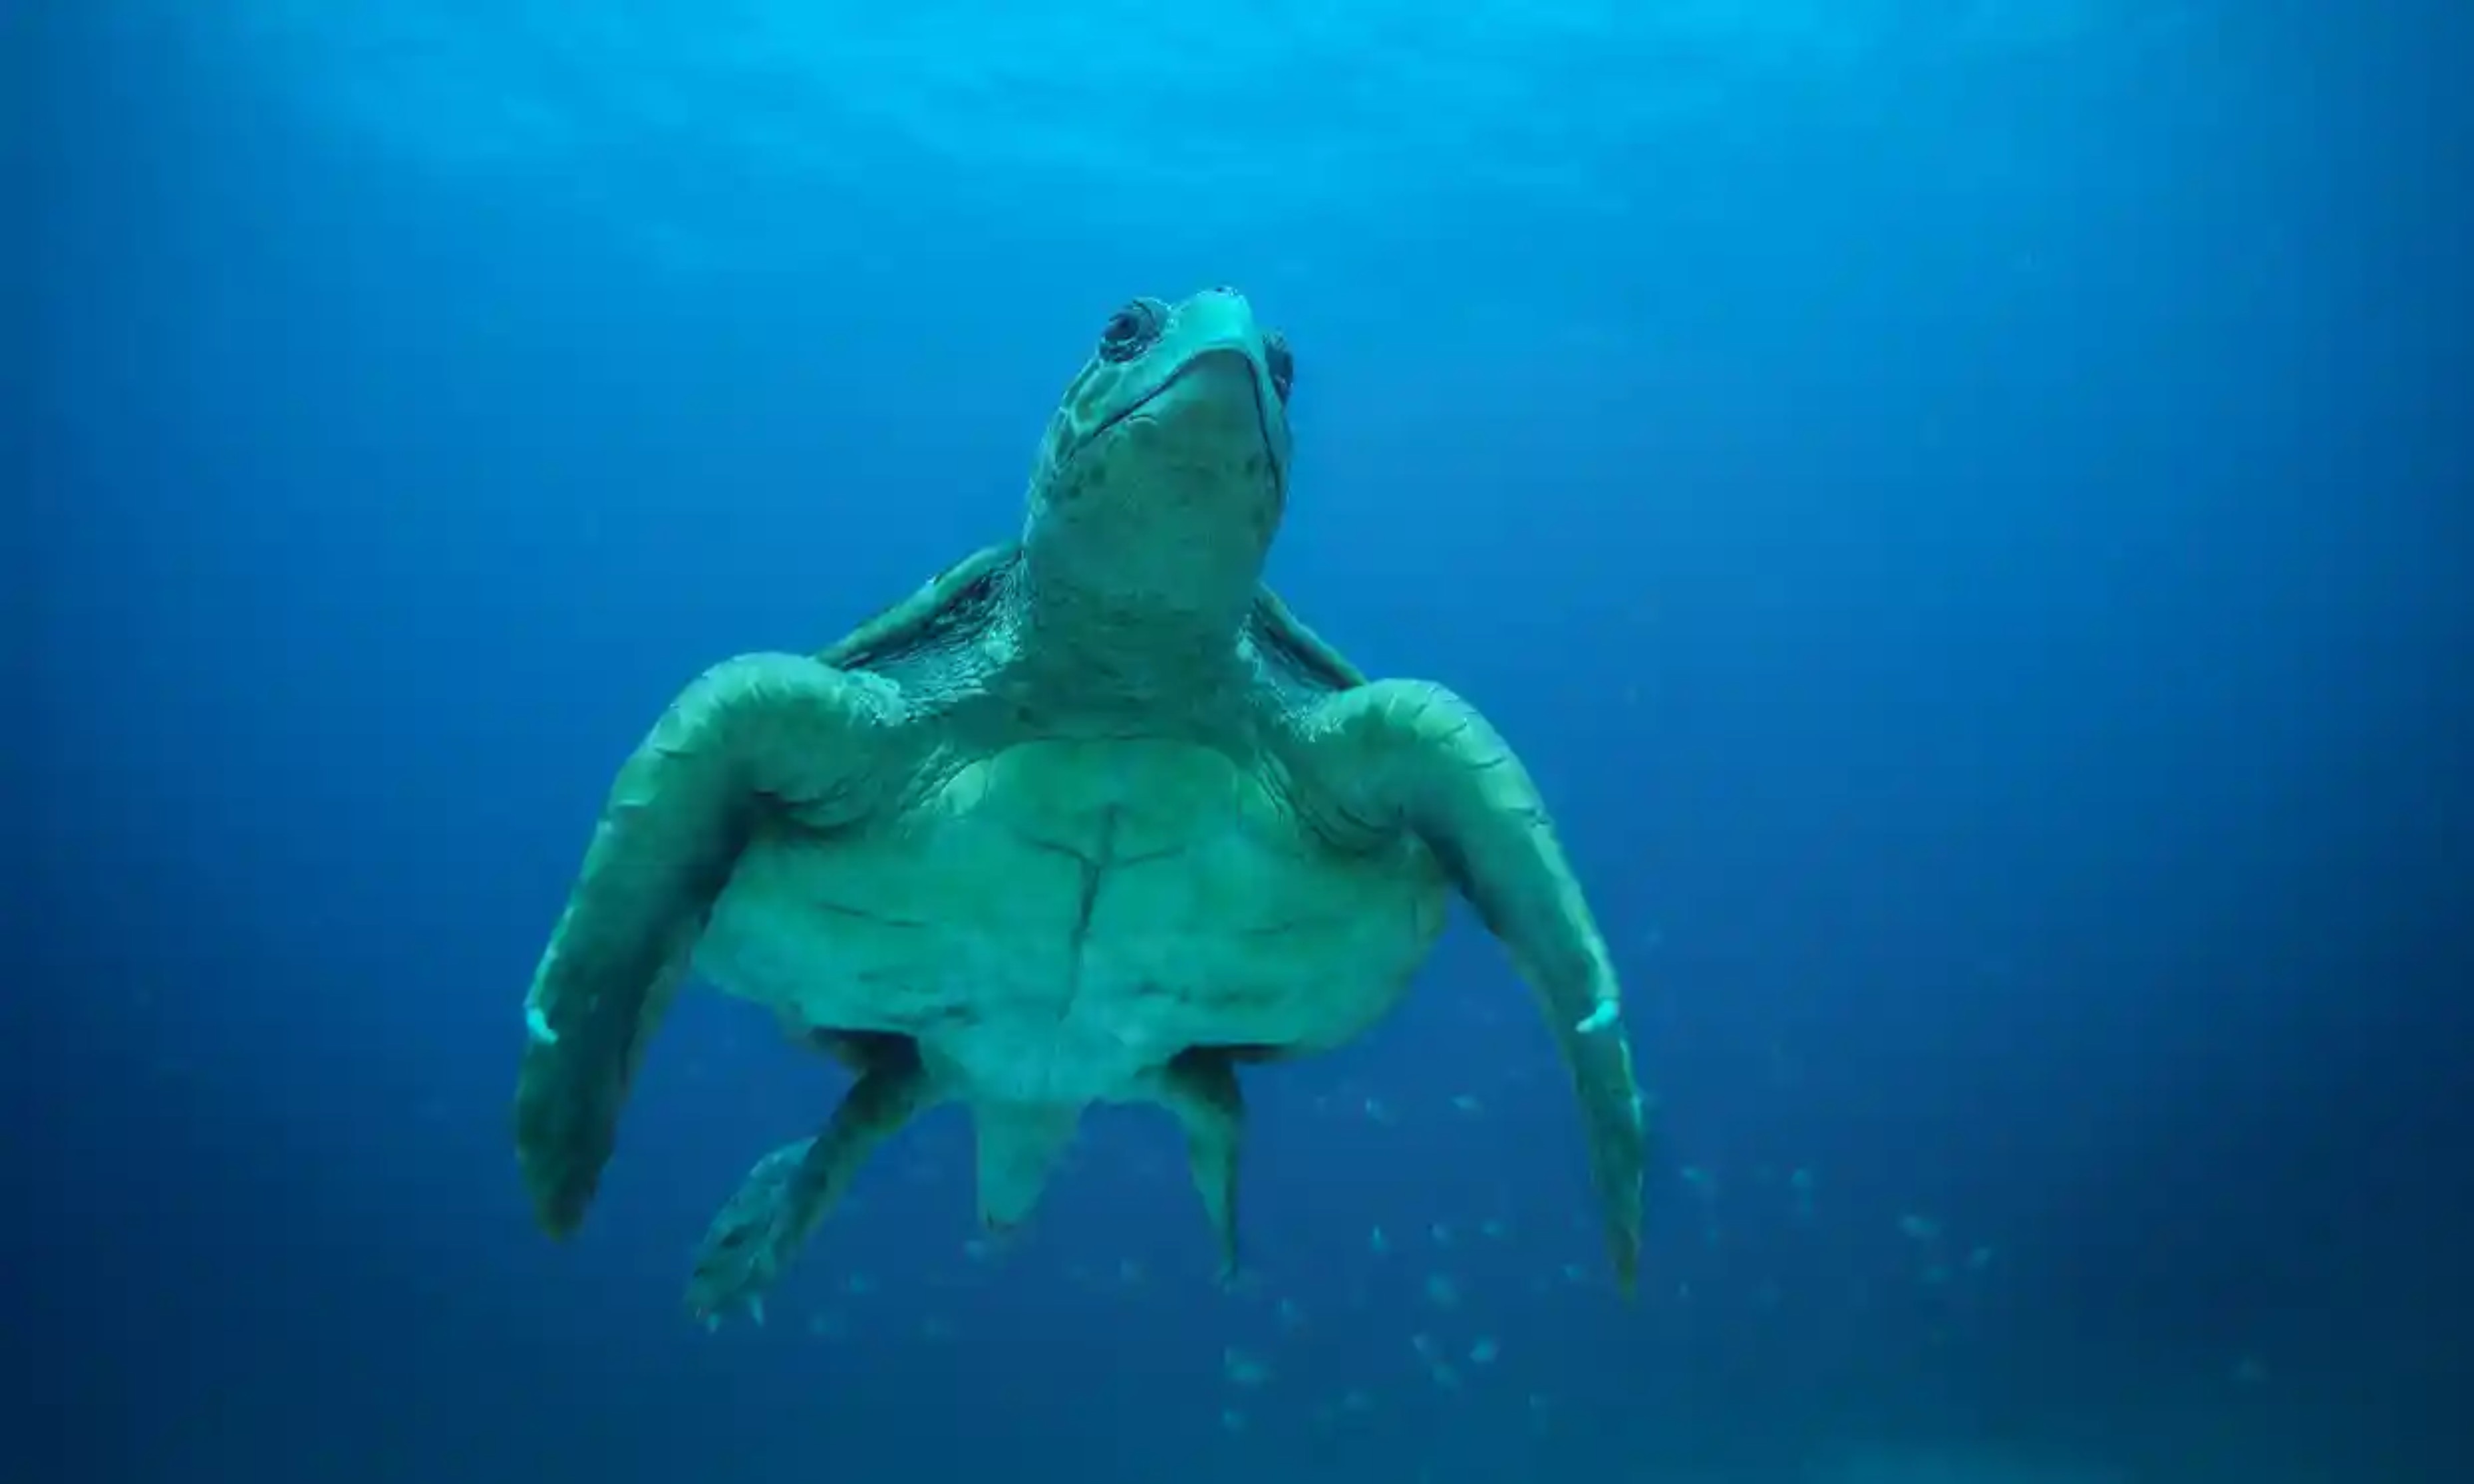 The number of sea turtle nests in the Cape Verde archipelago has risen from 10,725 in 2015 to almost 200,000 today. 
Pictured, a male loggerhead sea turtle glides through the pristine waters off the coast of Sal, Cape Verde.